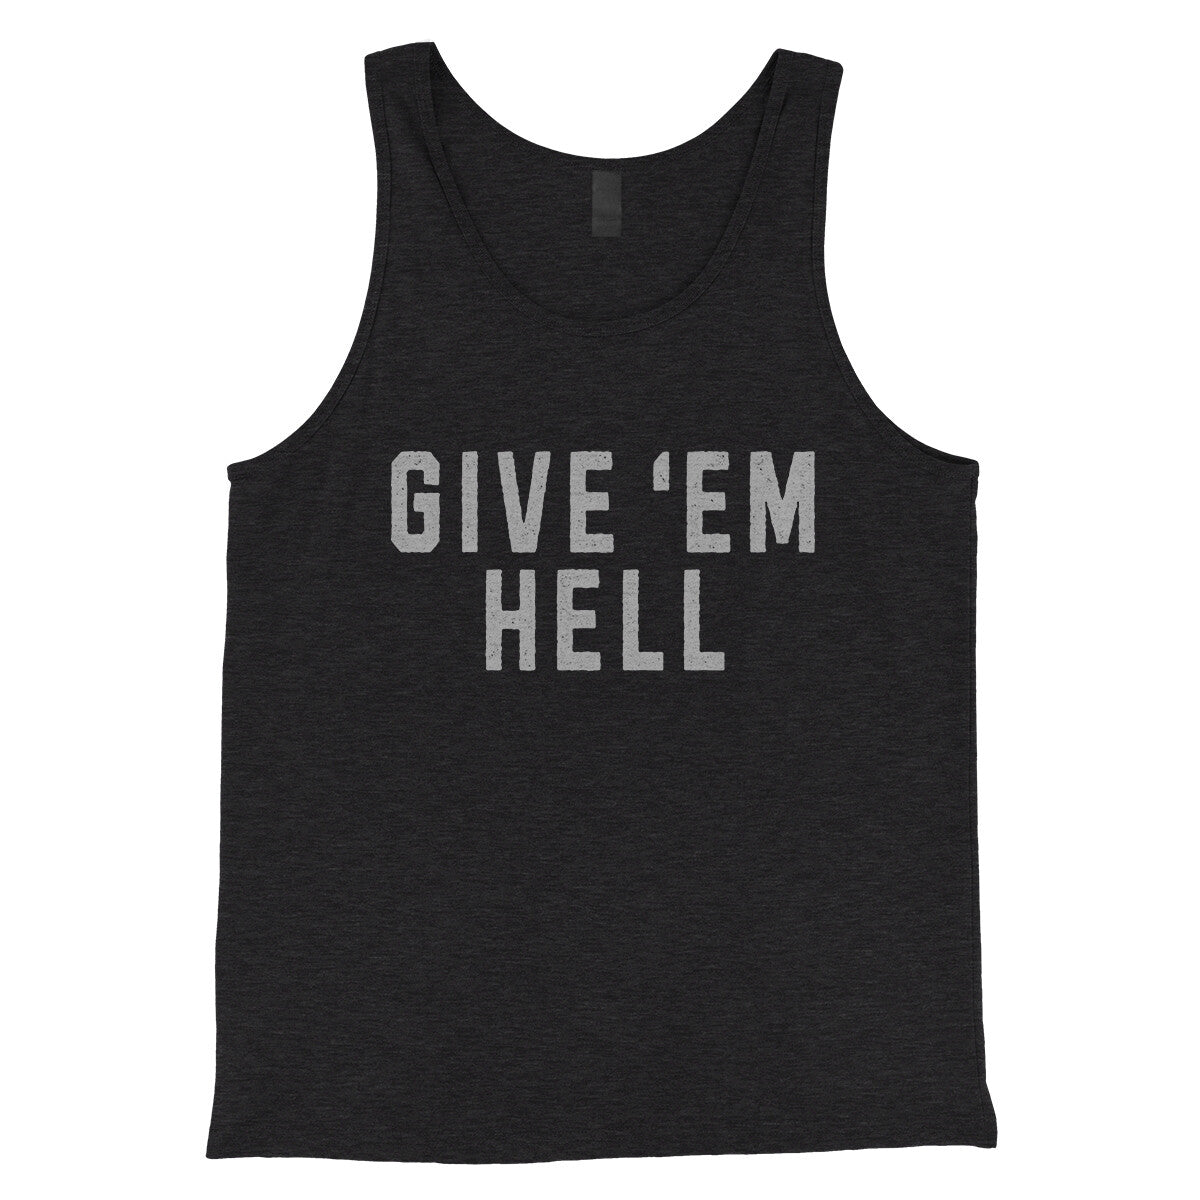 Give ‘em Hell in Charcoal Black TriBlend Color